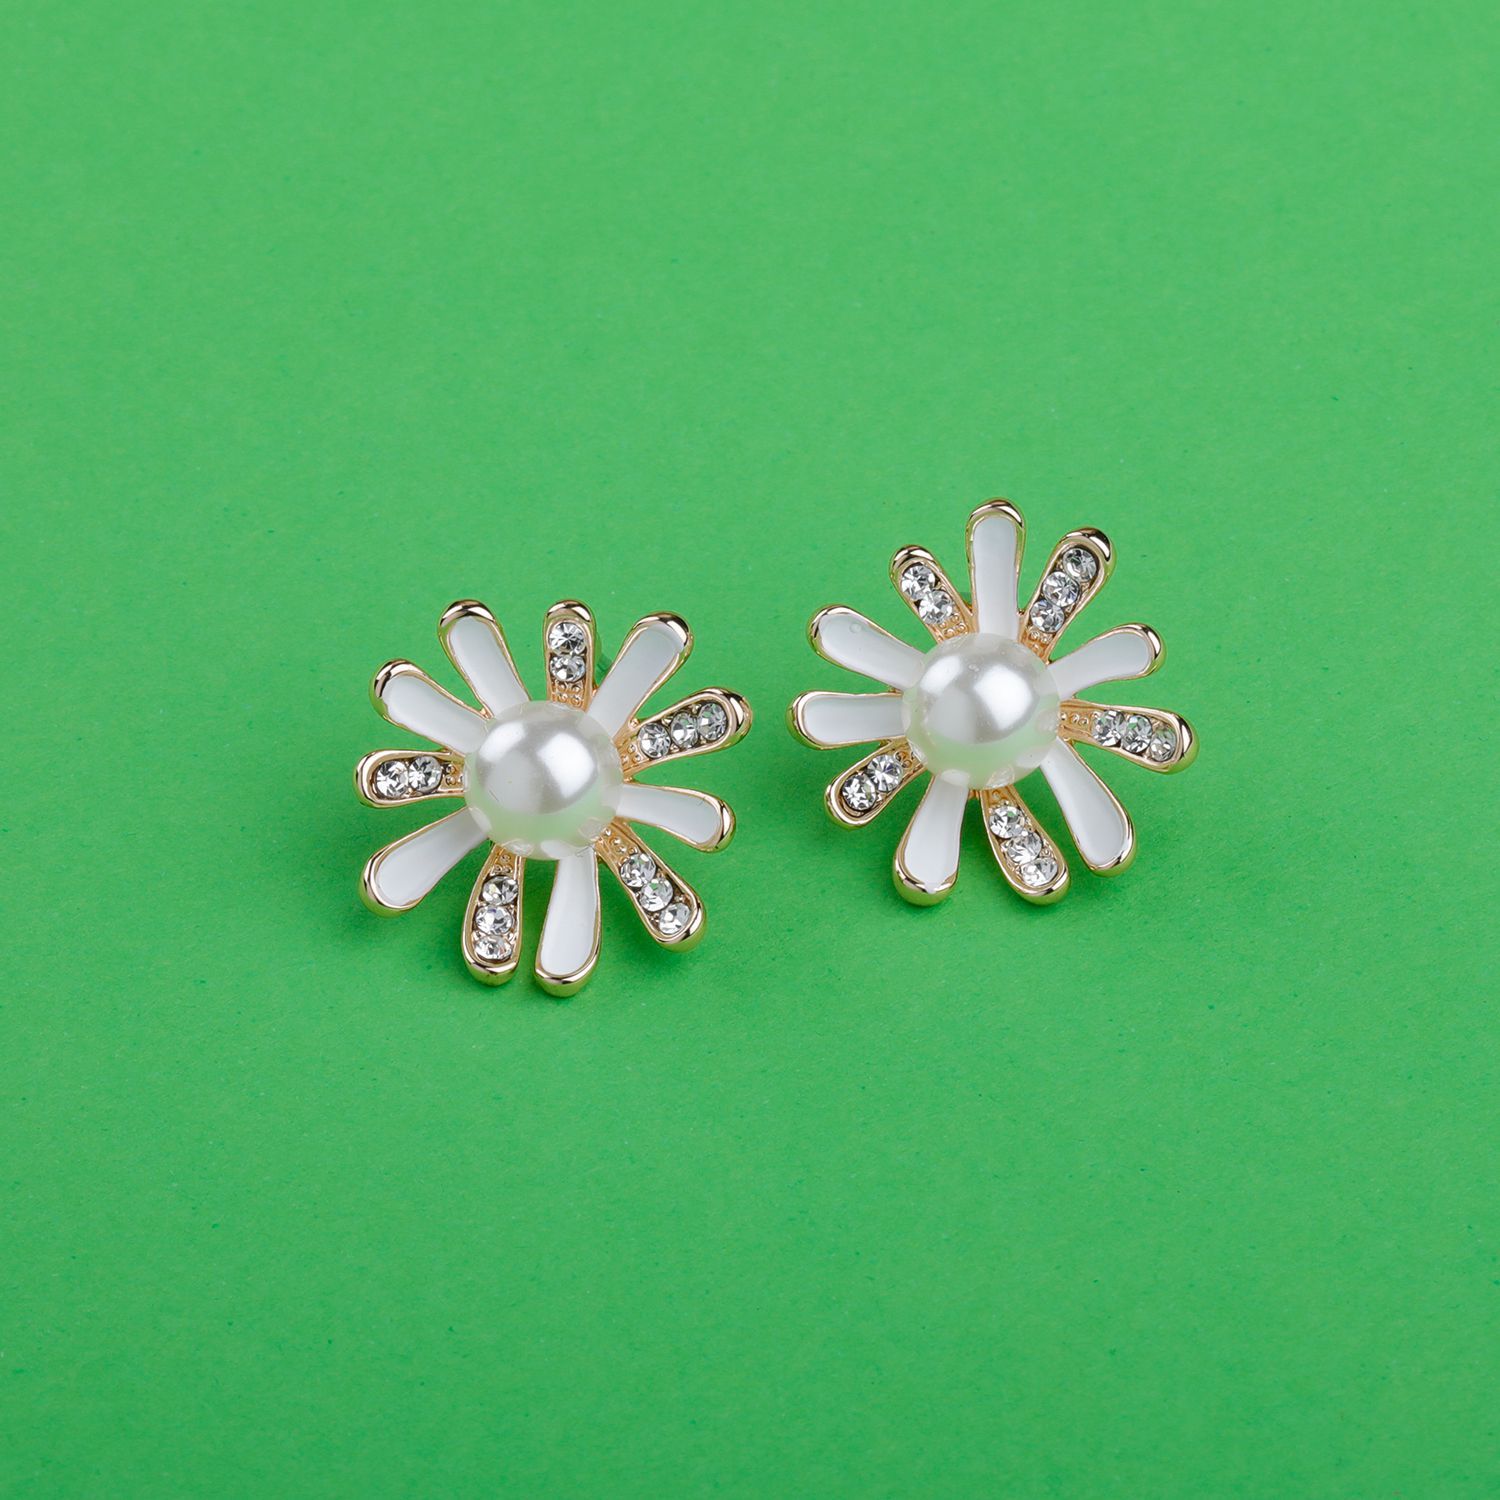     			Silver Shine Premium White Enamel Stylish Fancy Floral Design With Diamond Stud Earring For Girl And Women